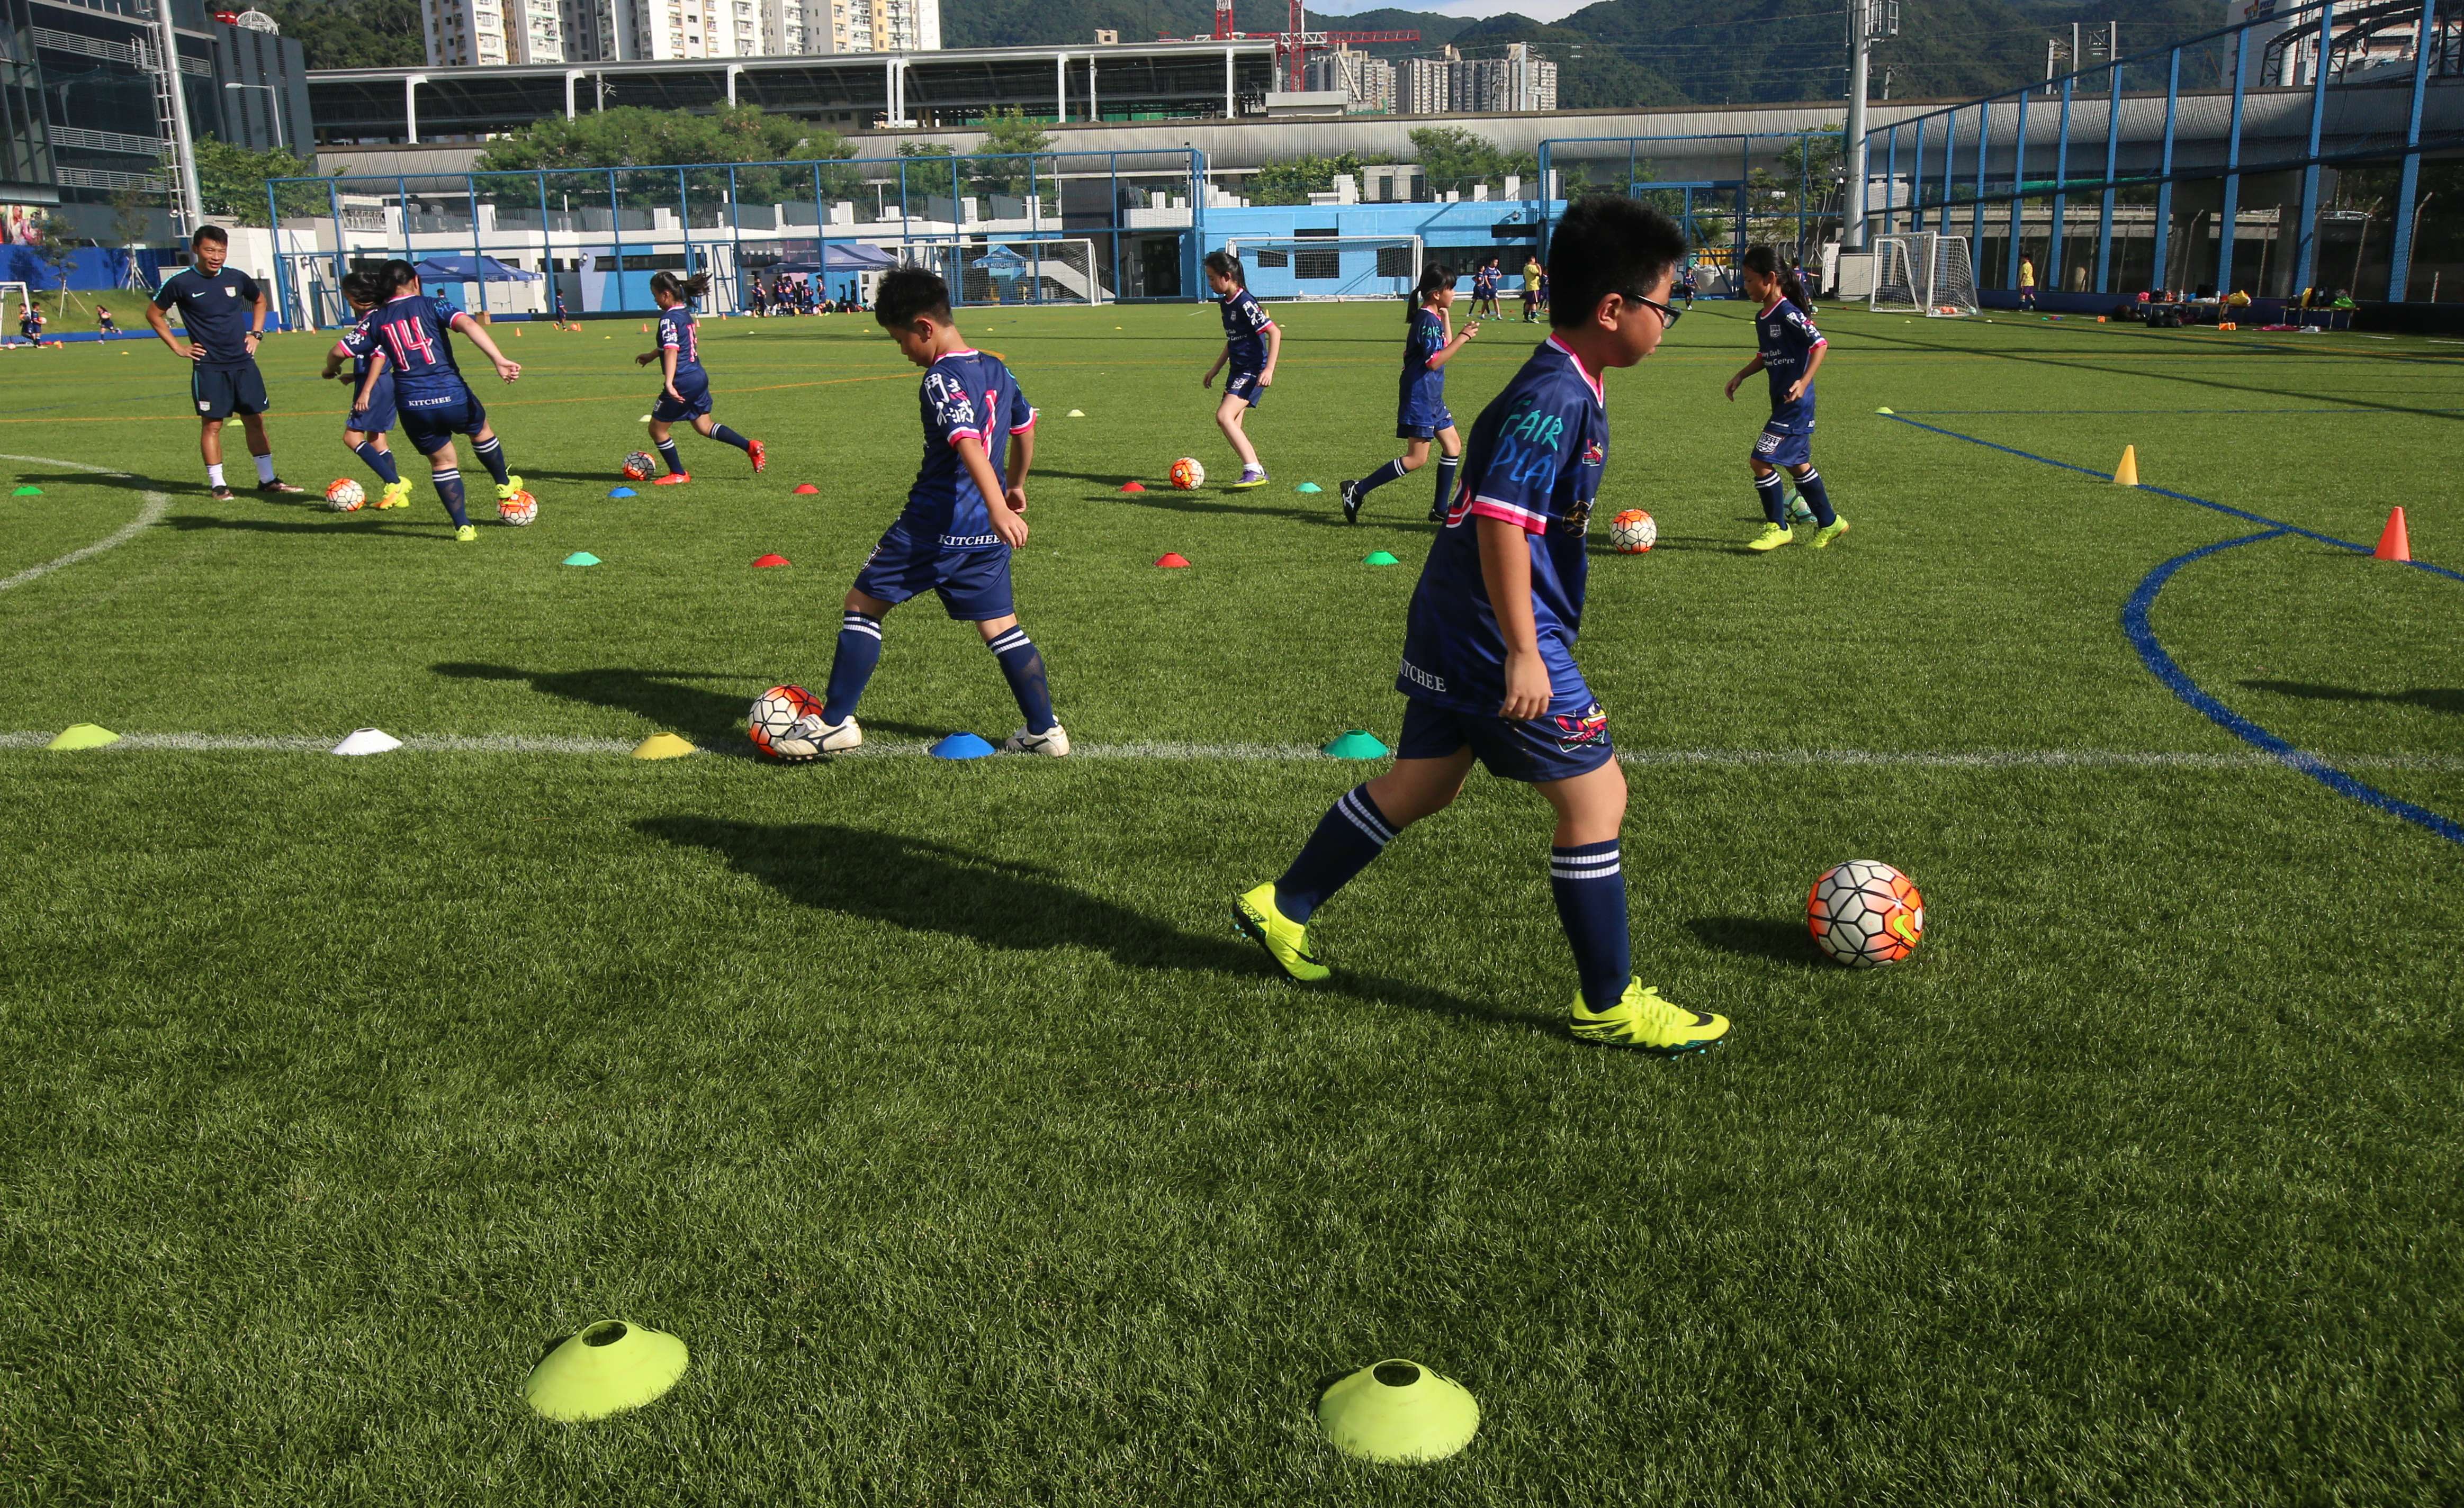 Children play football at the Kitchee sports centre in Sha Tin on October 4. The HK$84 million training centre is barely a year old. Photo: David Wong